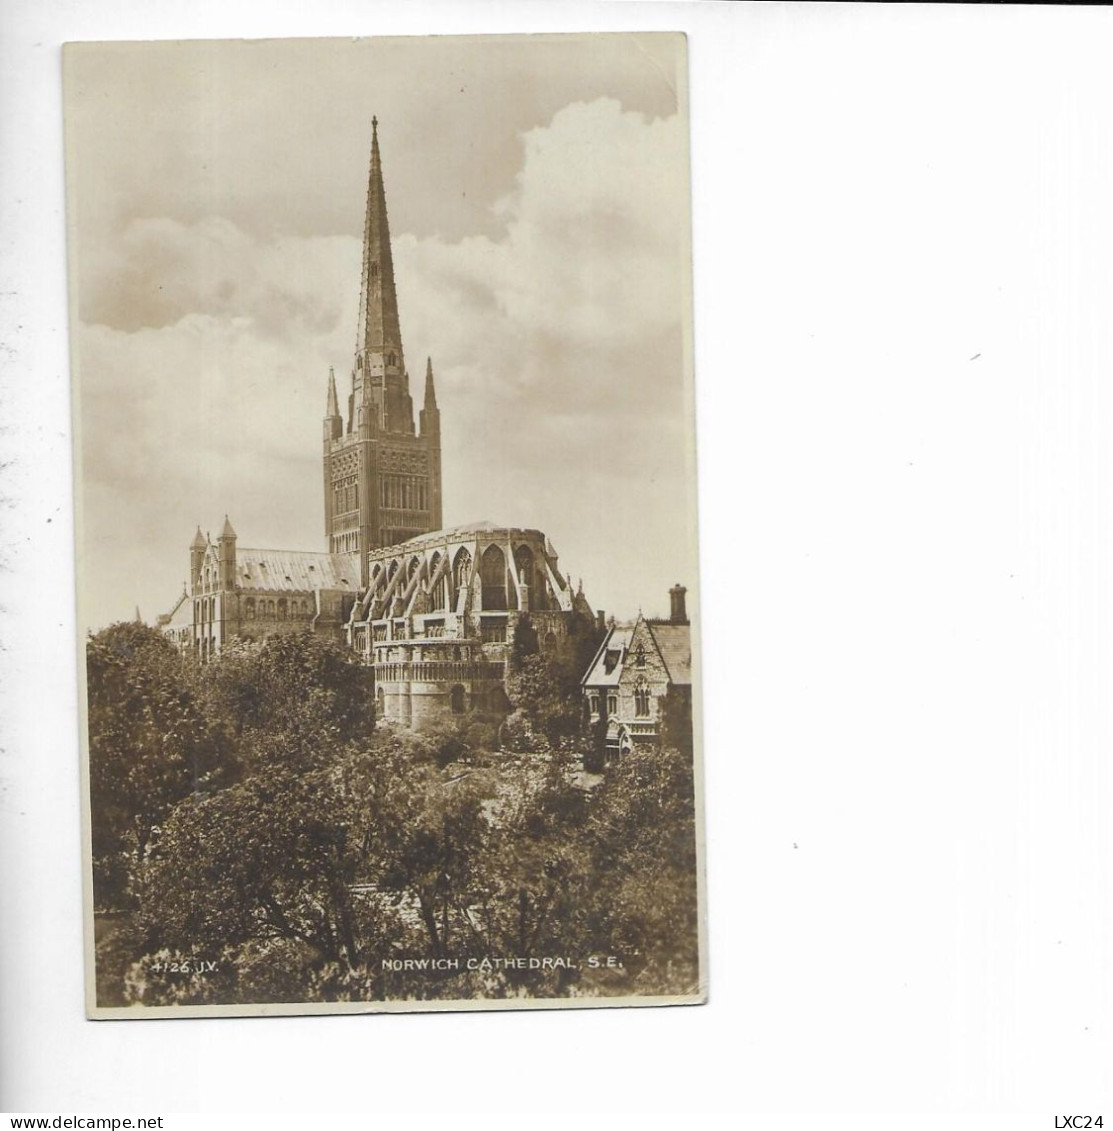 NORWICH CATHEDRAL. - Norwich